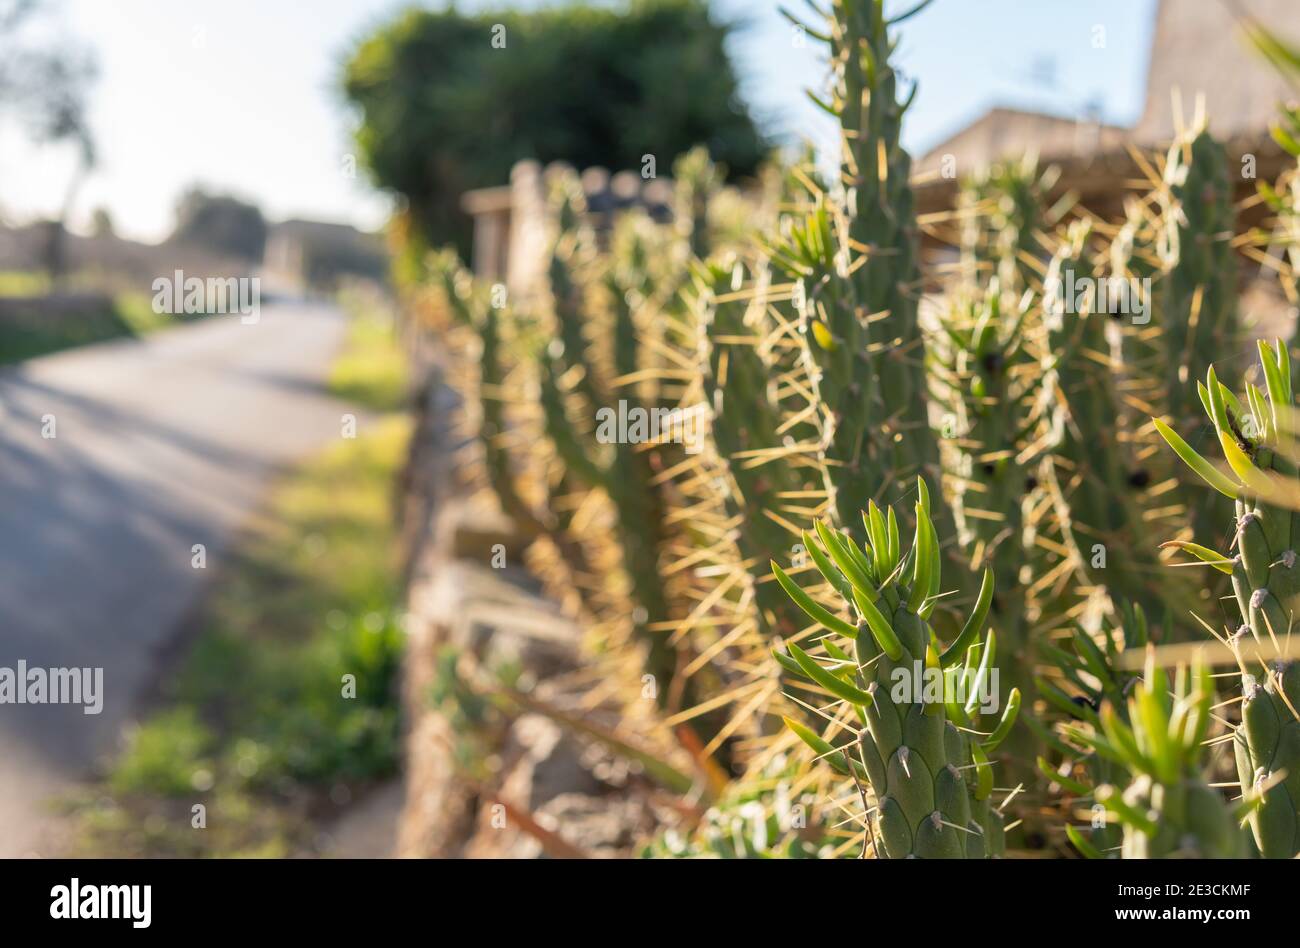 Close-up of a cactus (Opuntia subulata Engelm.) with the background out of focus on a sunny evening on a country road Stock Photo